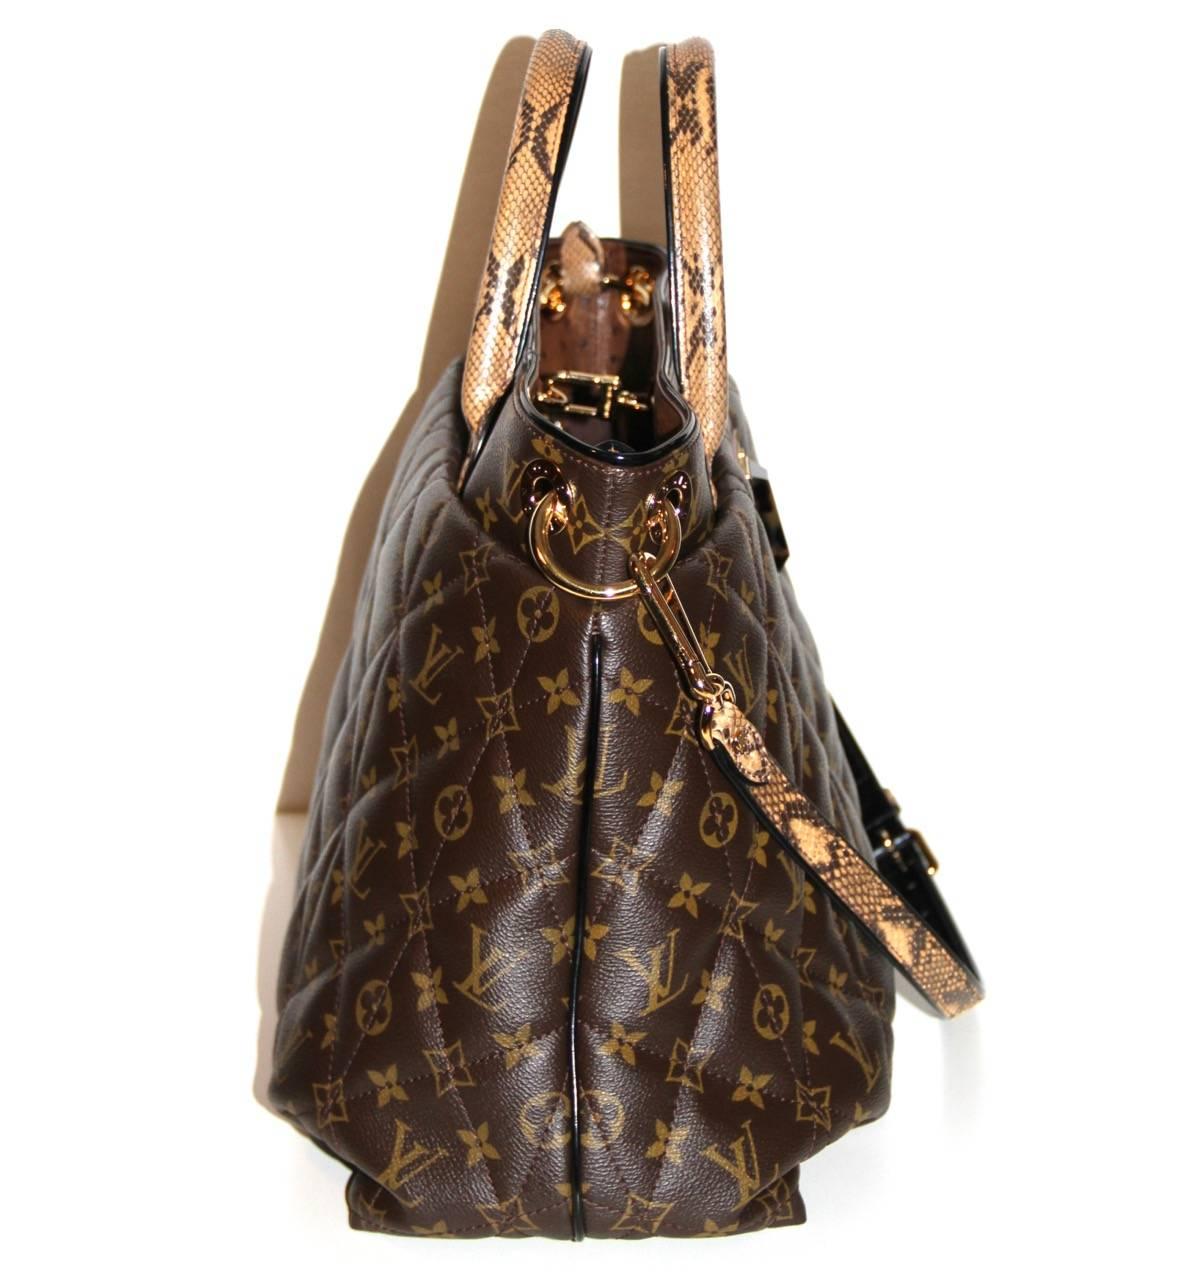 The signature Monogram Canvas has been softly quilted and the bag features python handles and adjustable, removable shoulder straps, black patent leather trim, an ostrich inside trim, one front pocket with tiger eye twist lock, an open top with snap